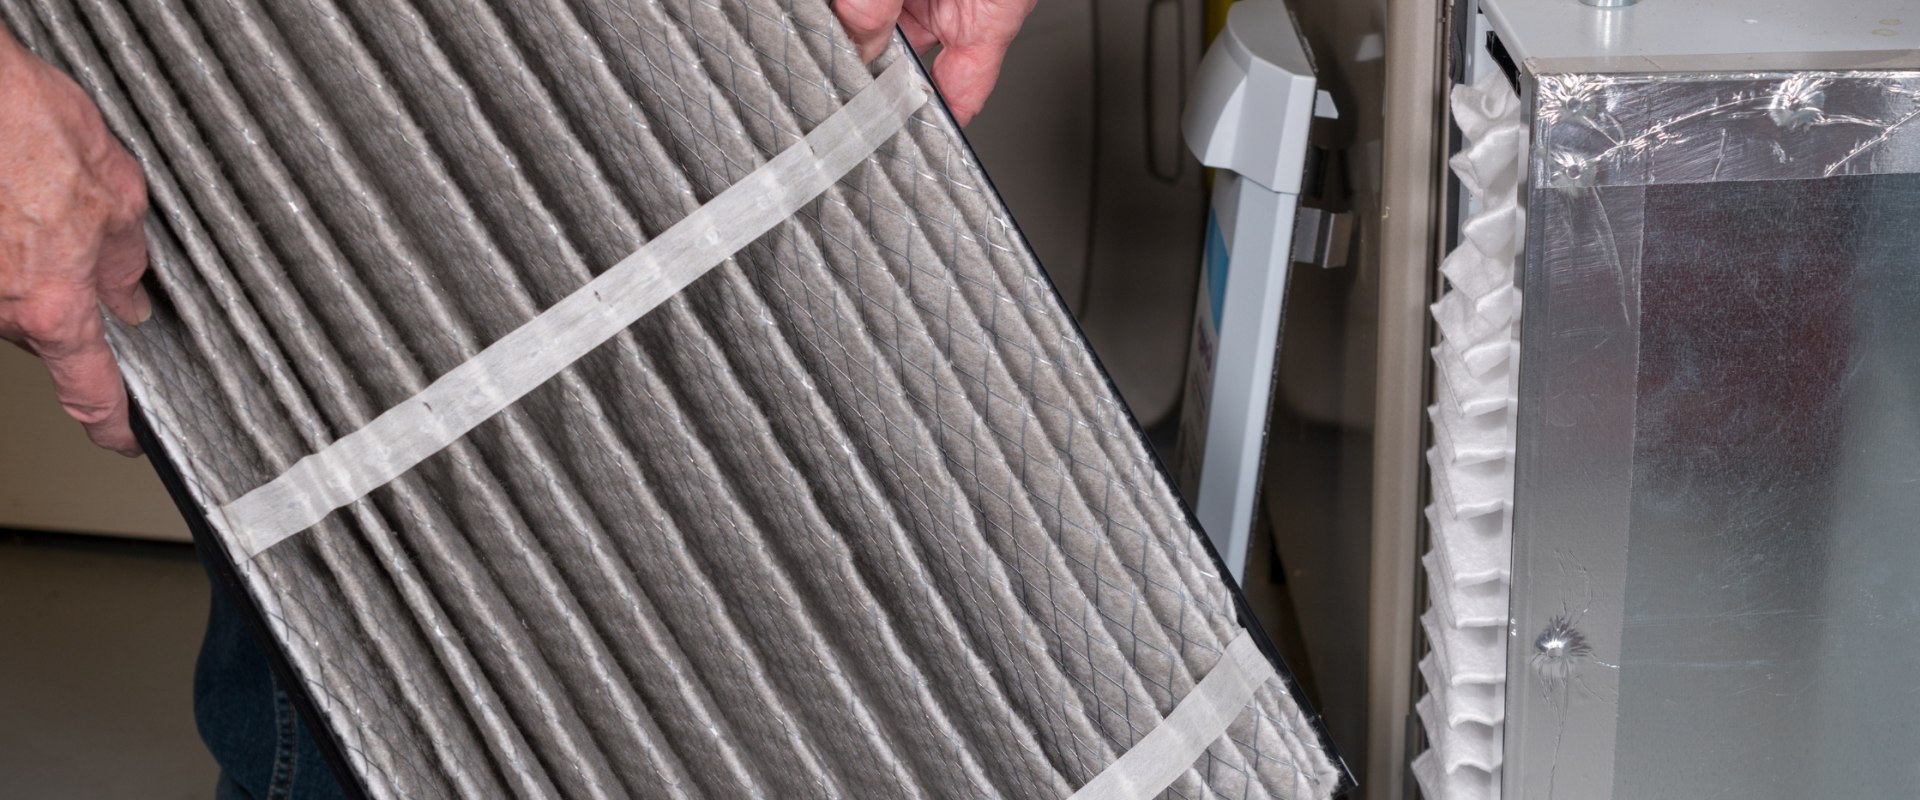 What Size Furnace Filter Should I Use for My Home?